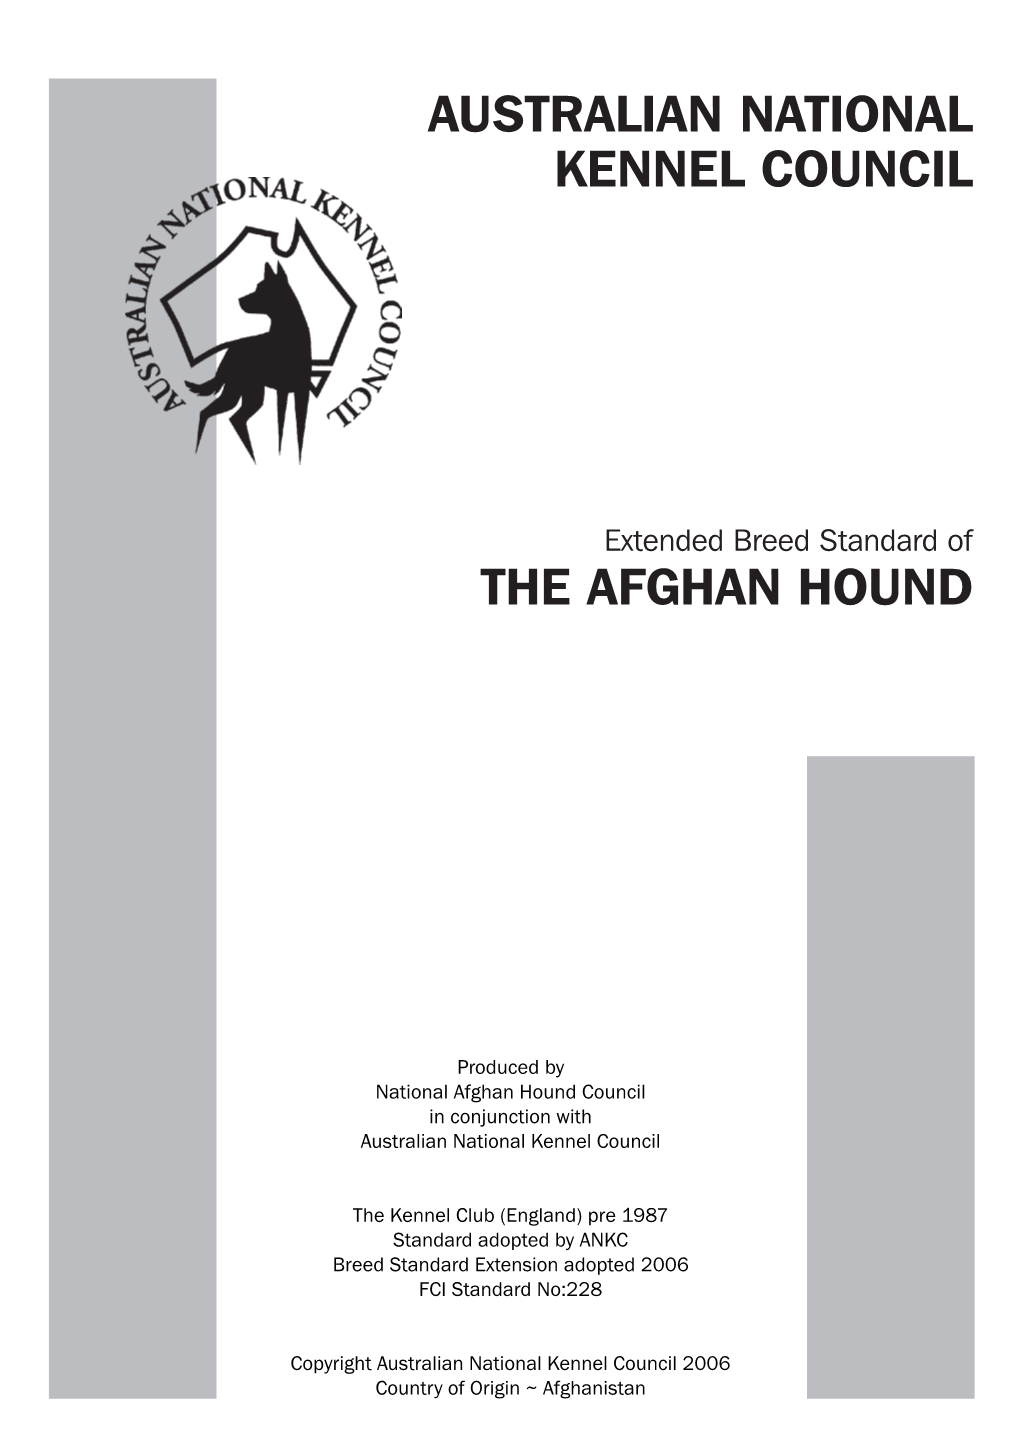 Extended Breed Standard of the AFGHAN HOUND